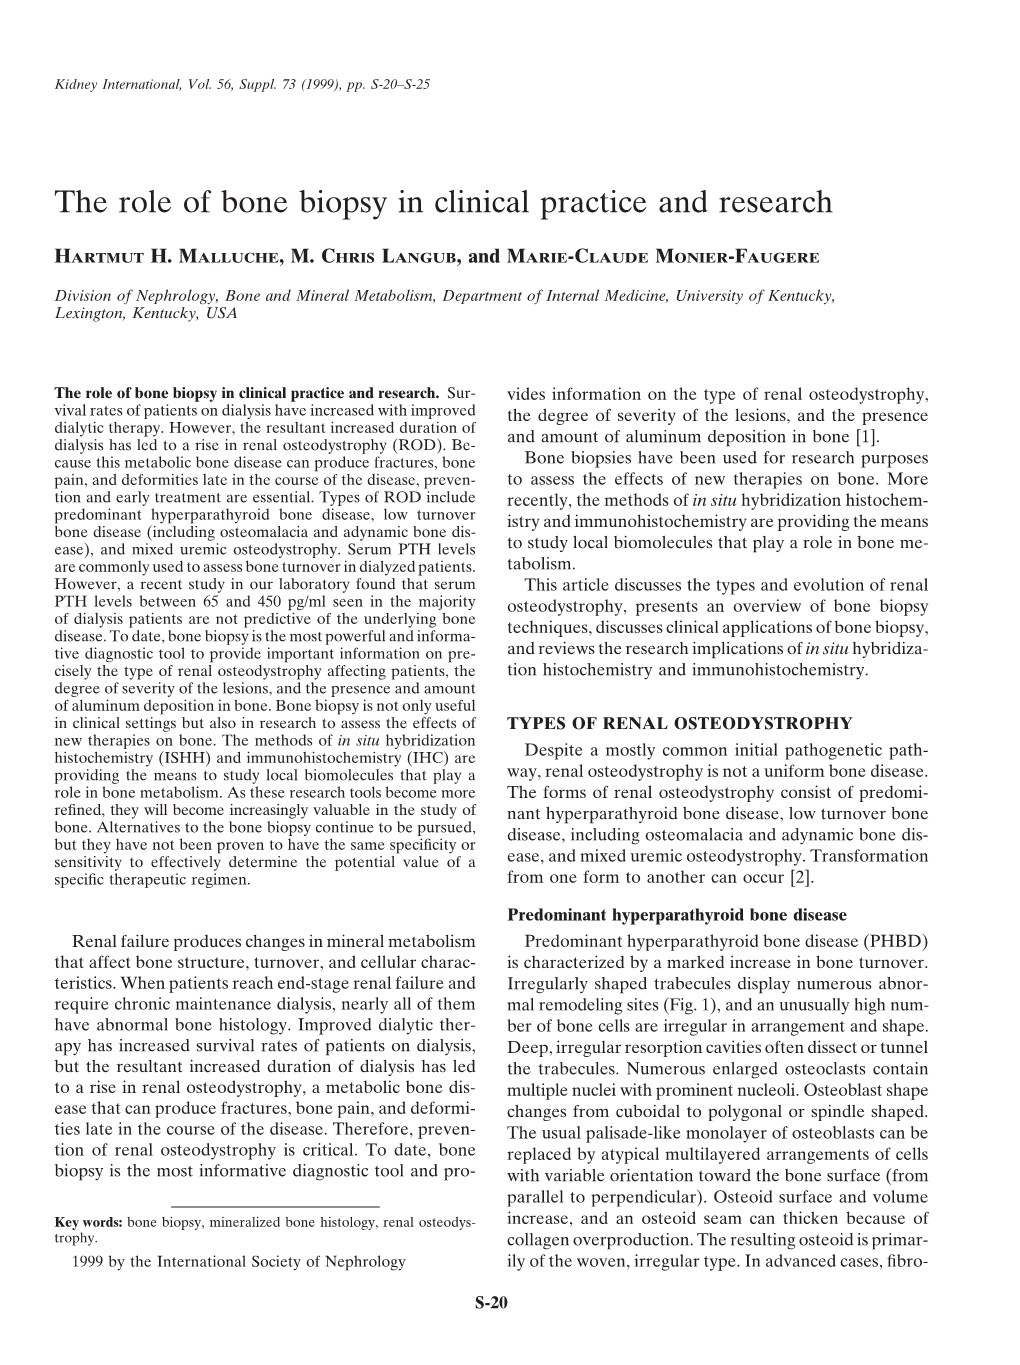 The Role of Bone Biopsy in Clinical Practice and Research